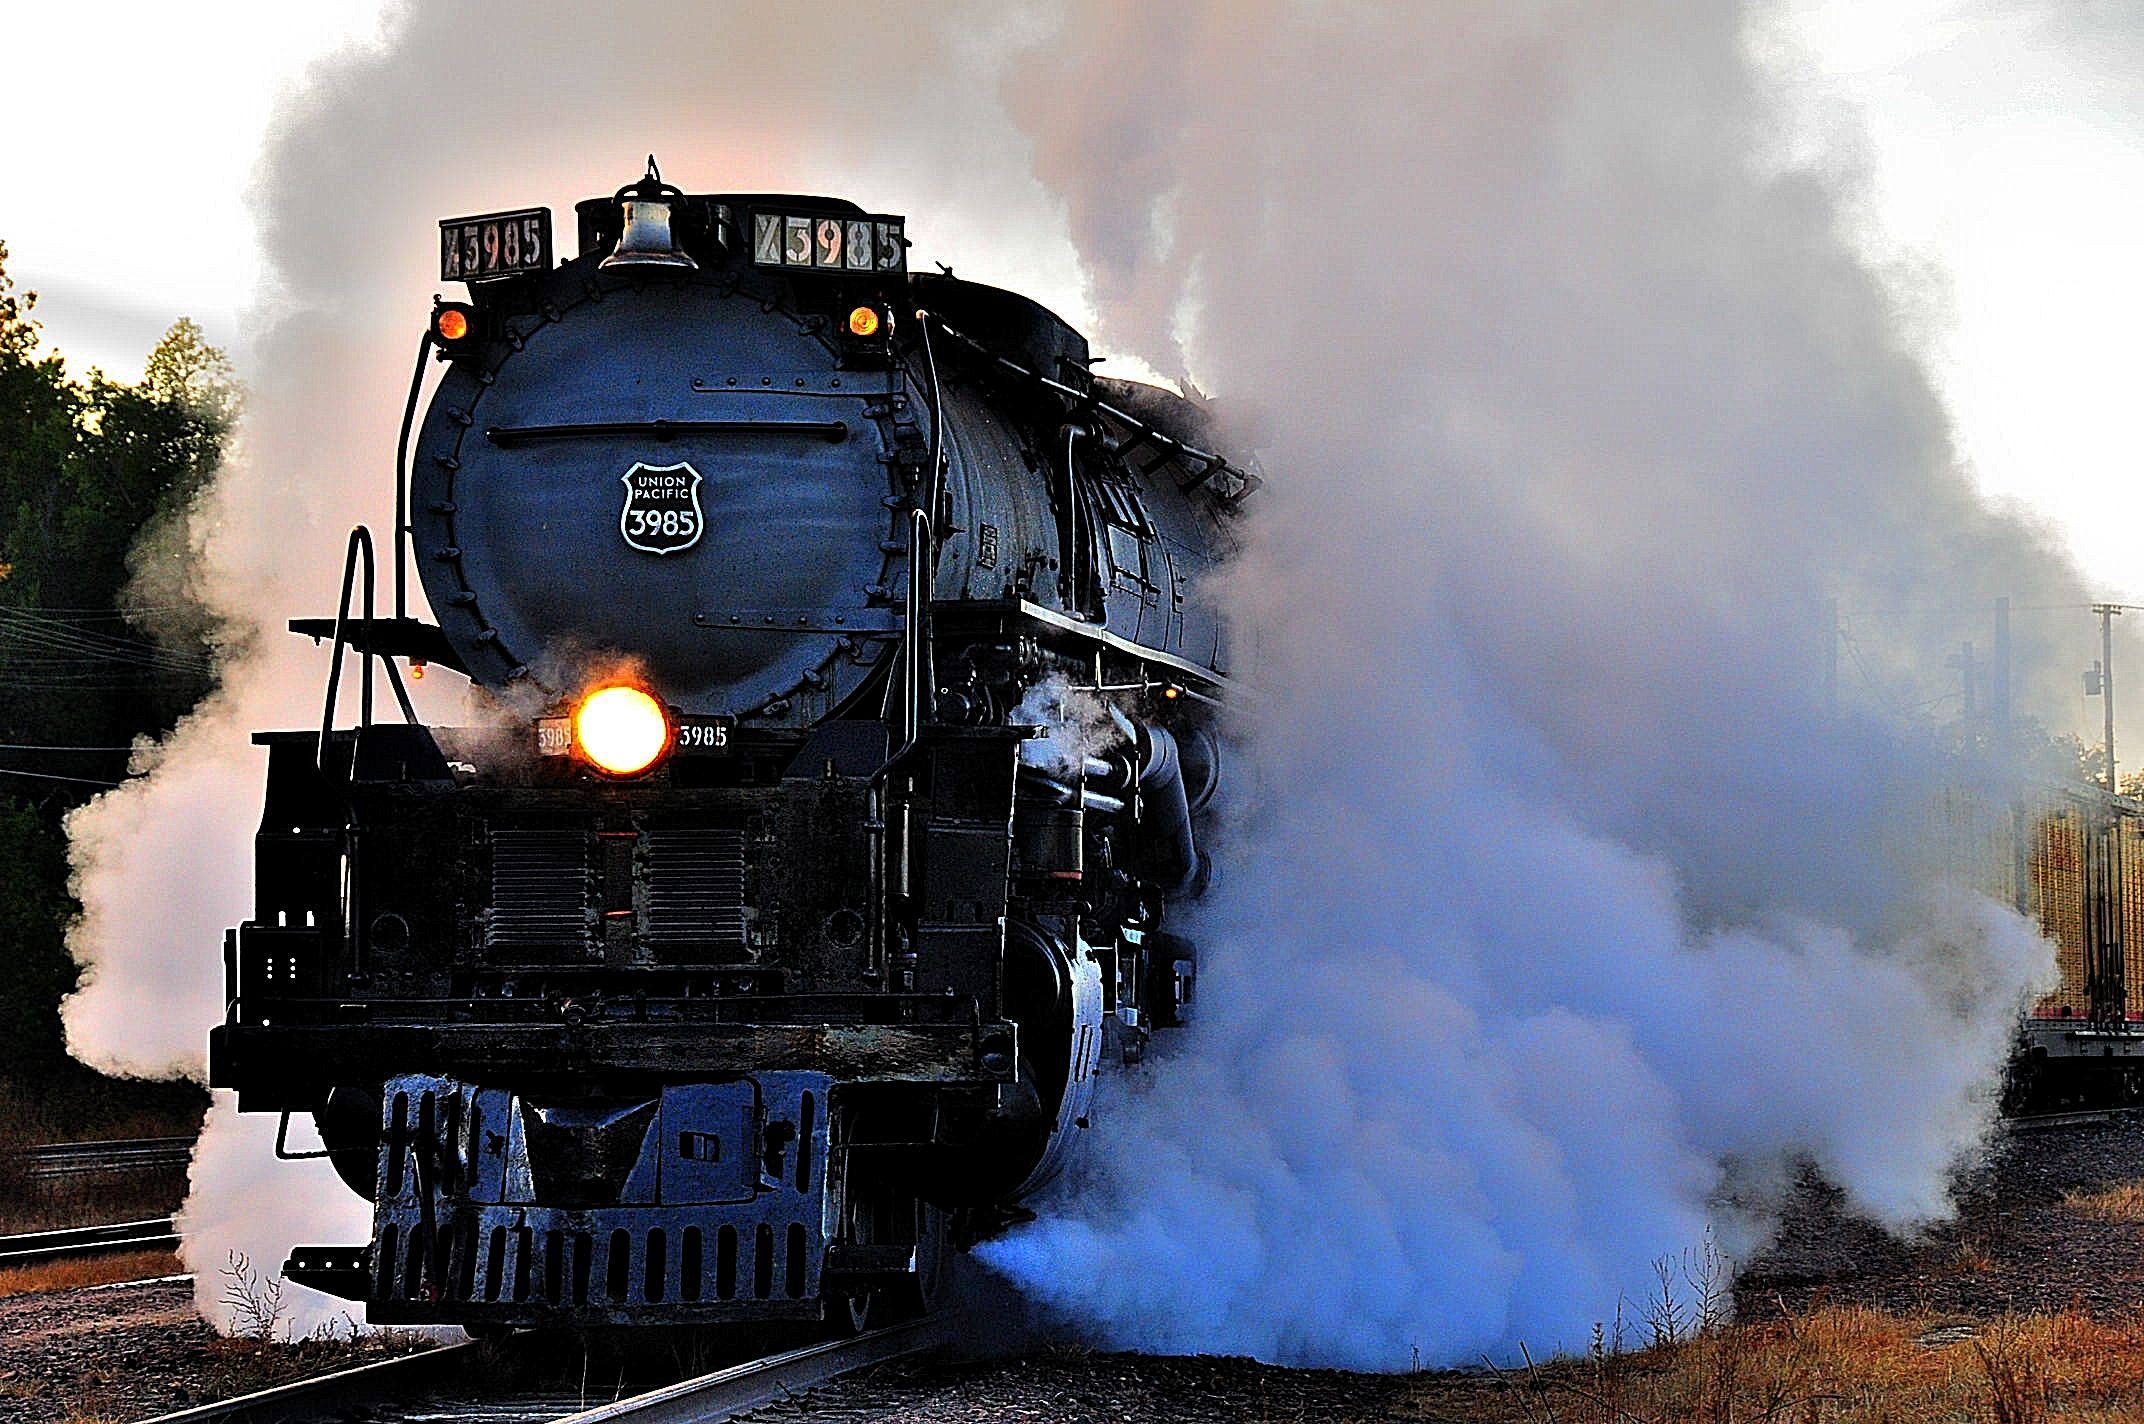 Train engine with a large cloud of smoke/steam coming from the train